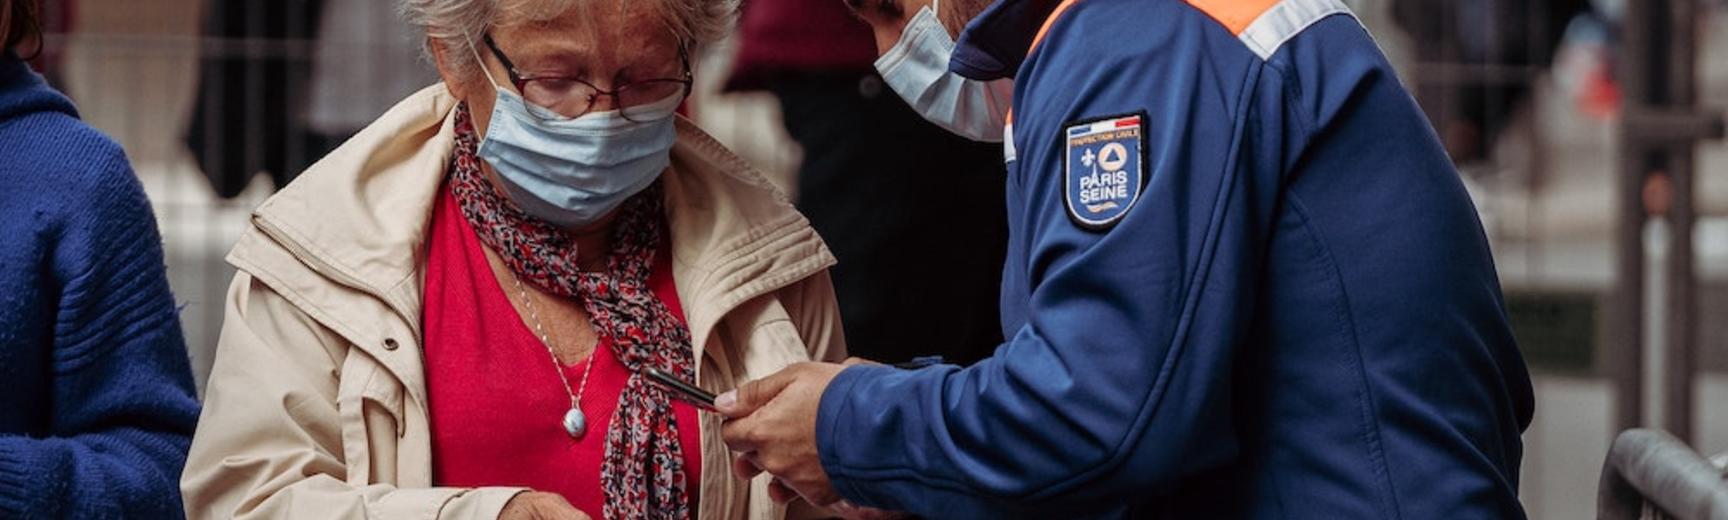 A woman wearing a mask in a queue of people presents vaccine documentation to an official permitting entry